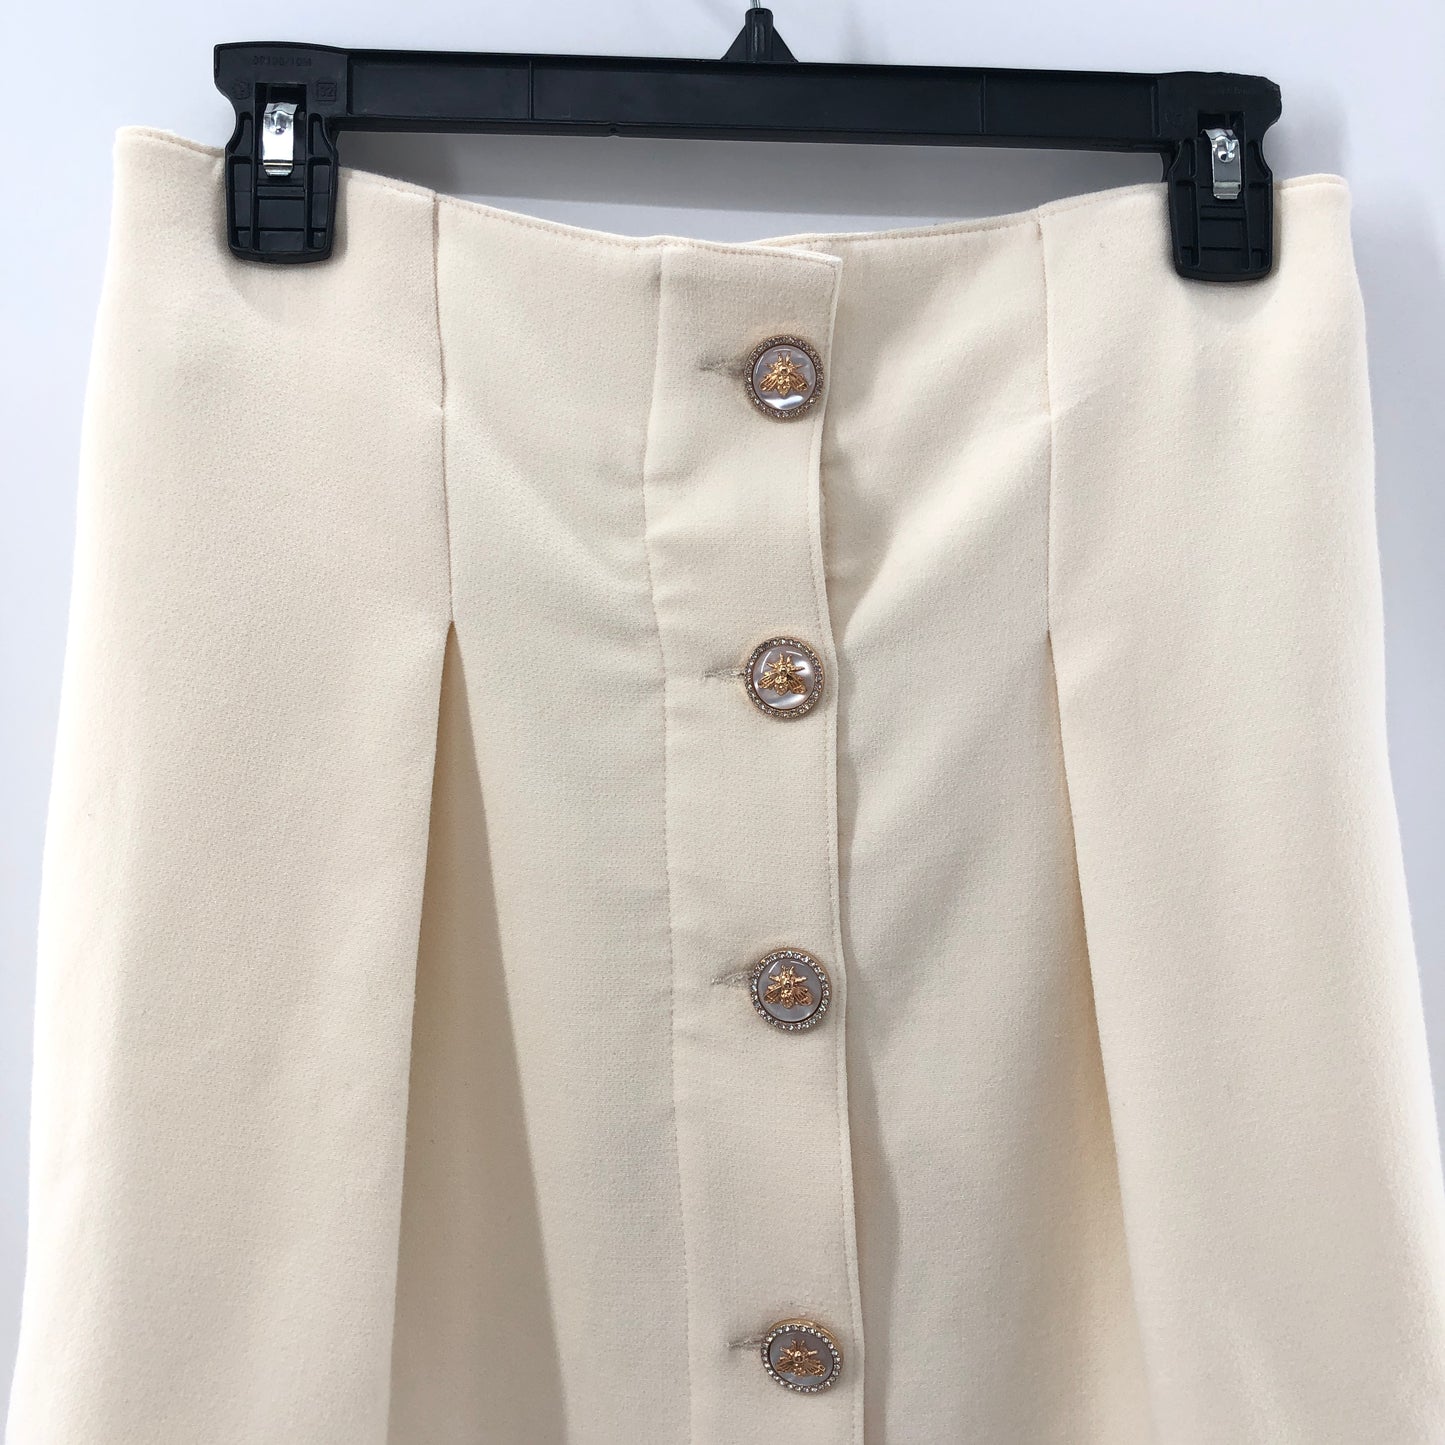 Sabina Musayev Buttercup Skirt in Off White